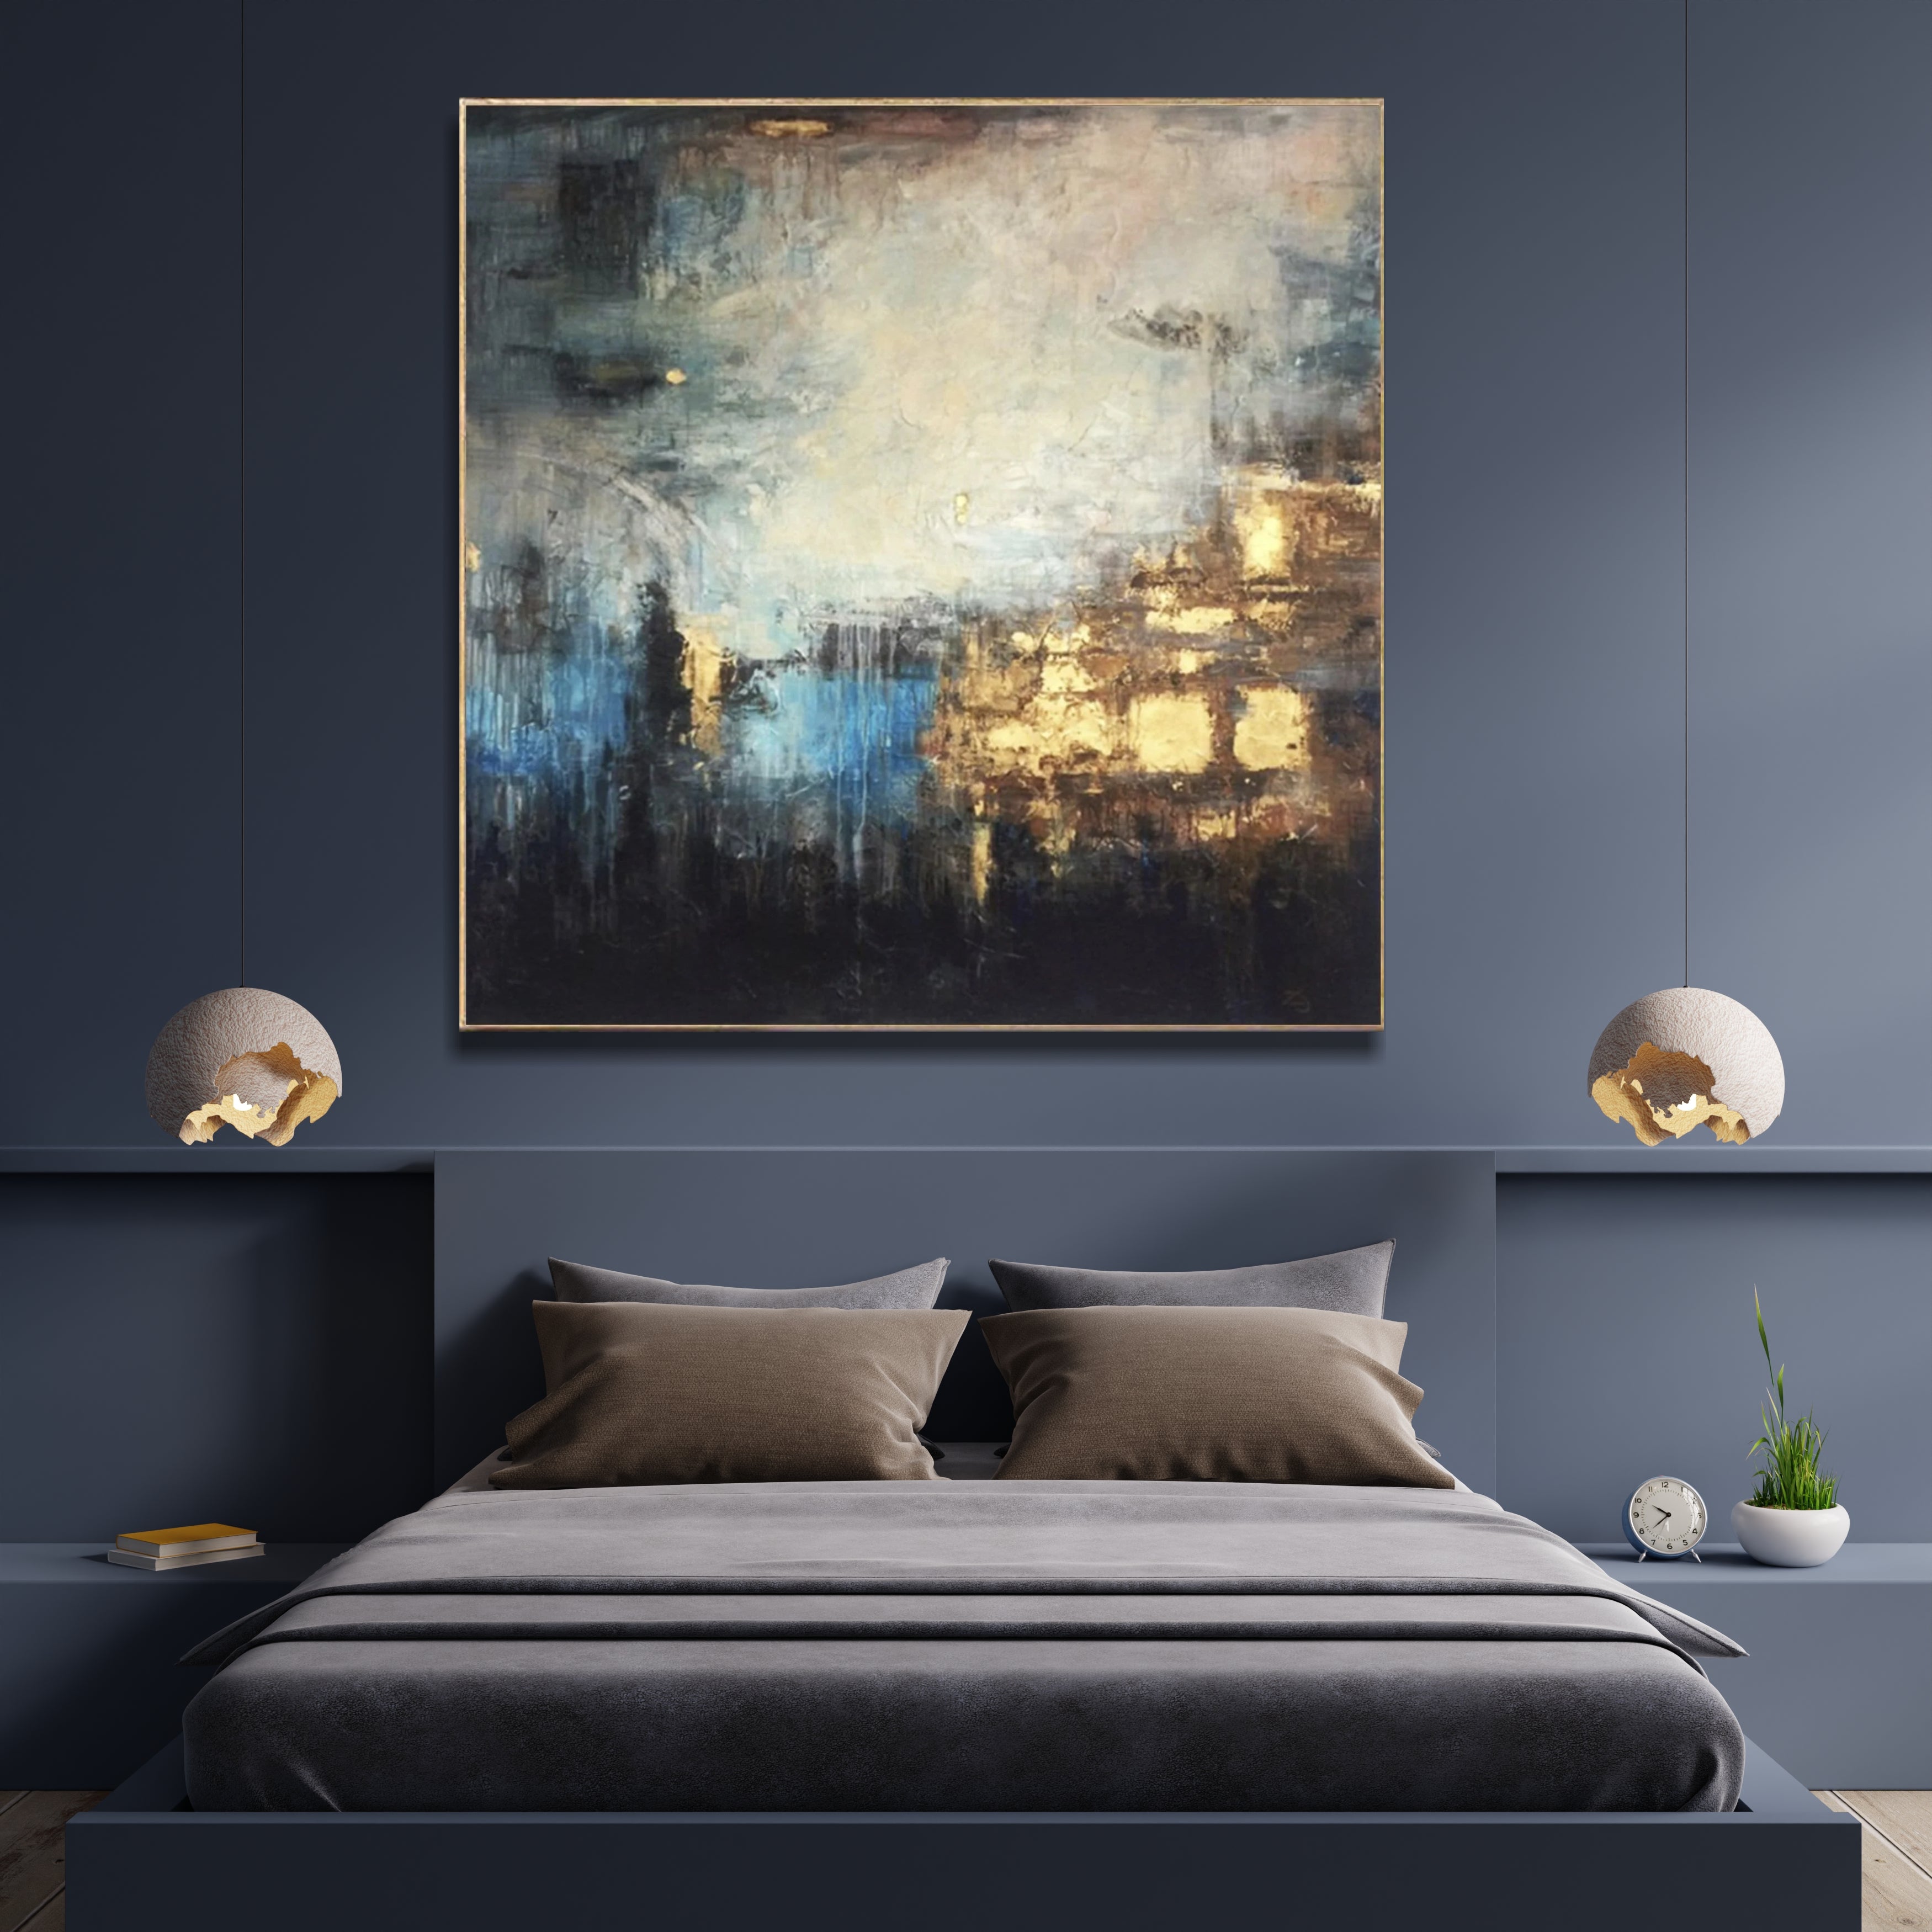 Cool Colorful Bedrooms Paintings slider2-image-1